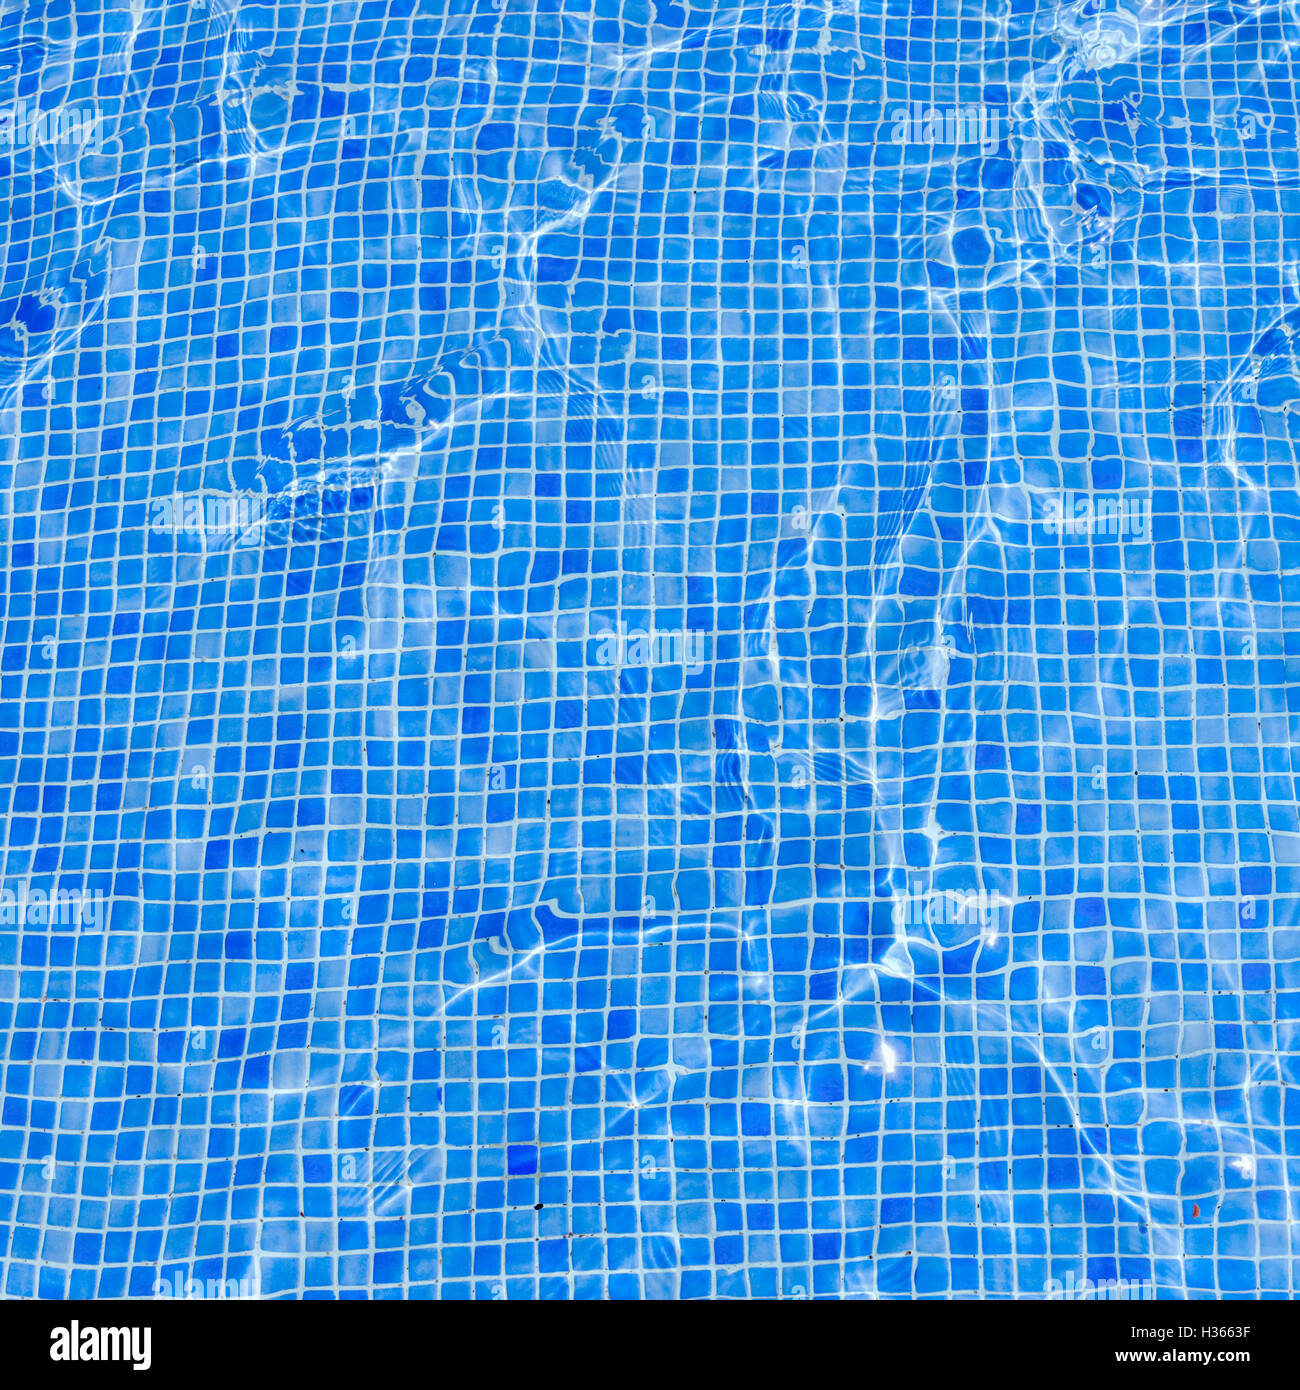 Square background swimming pool floor water covered blue tiles Stock Photo